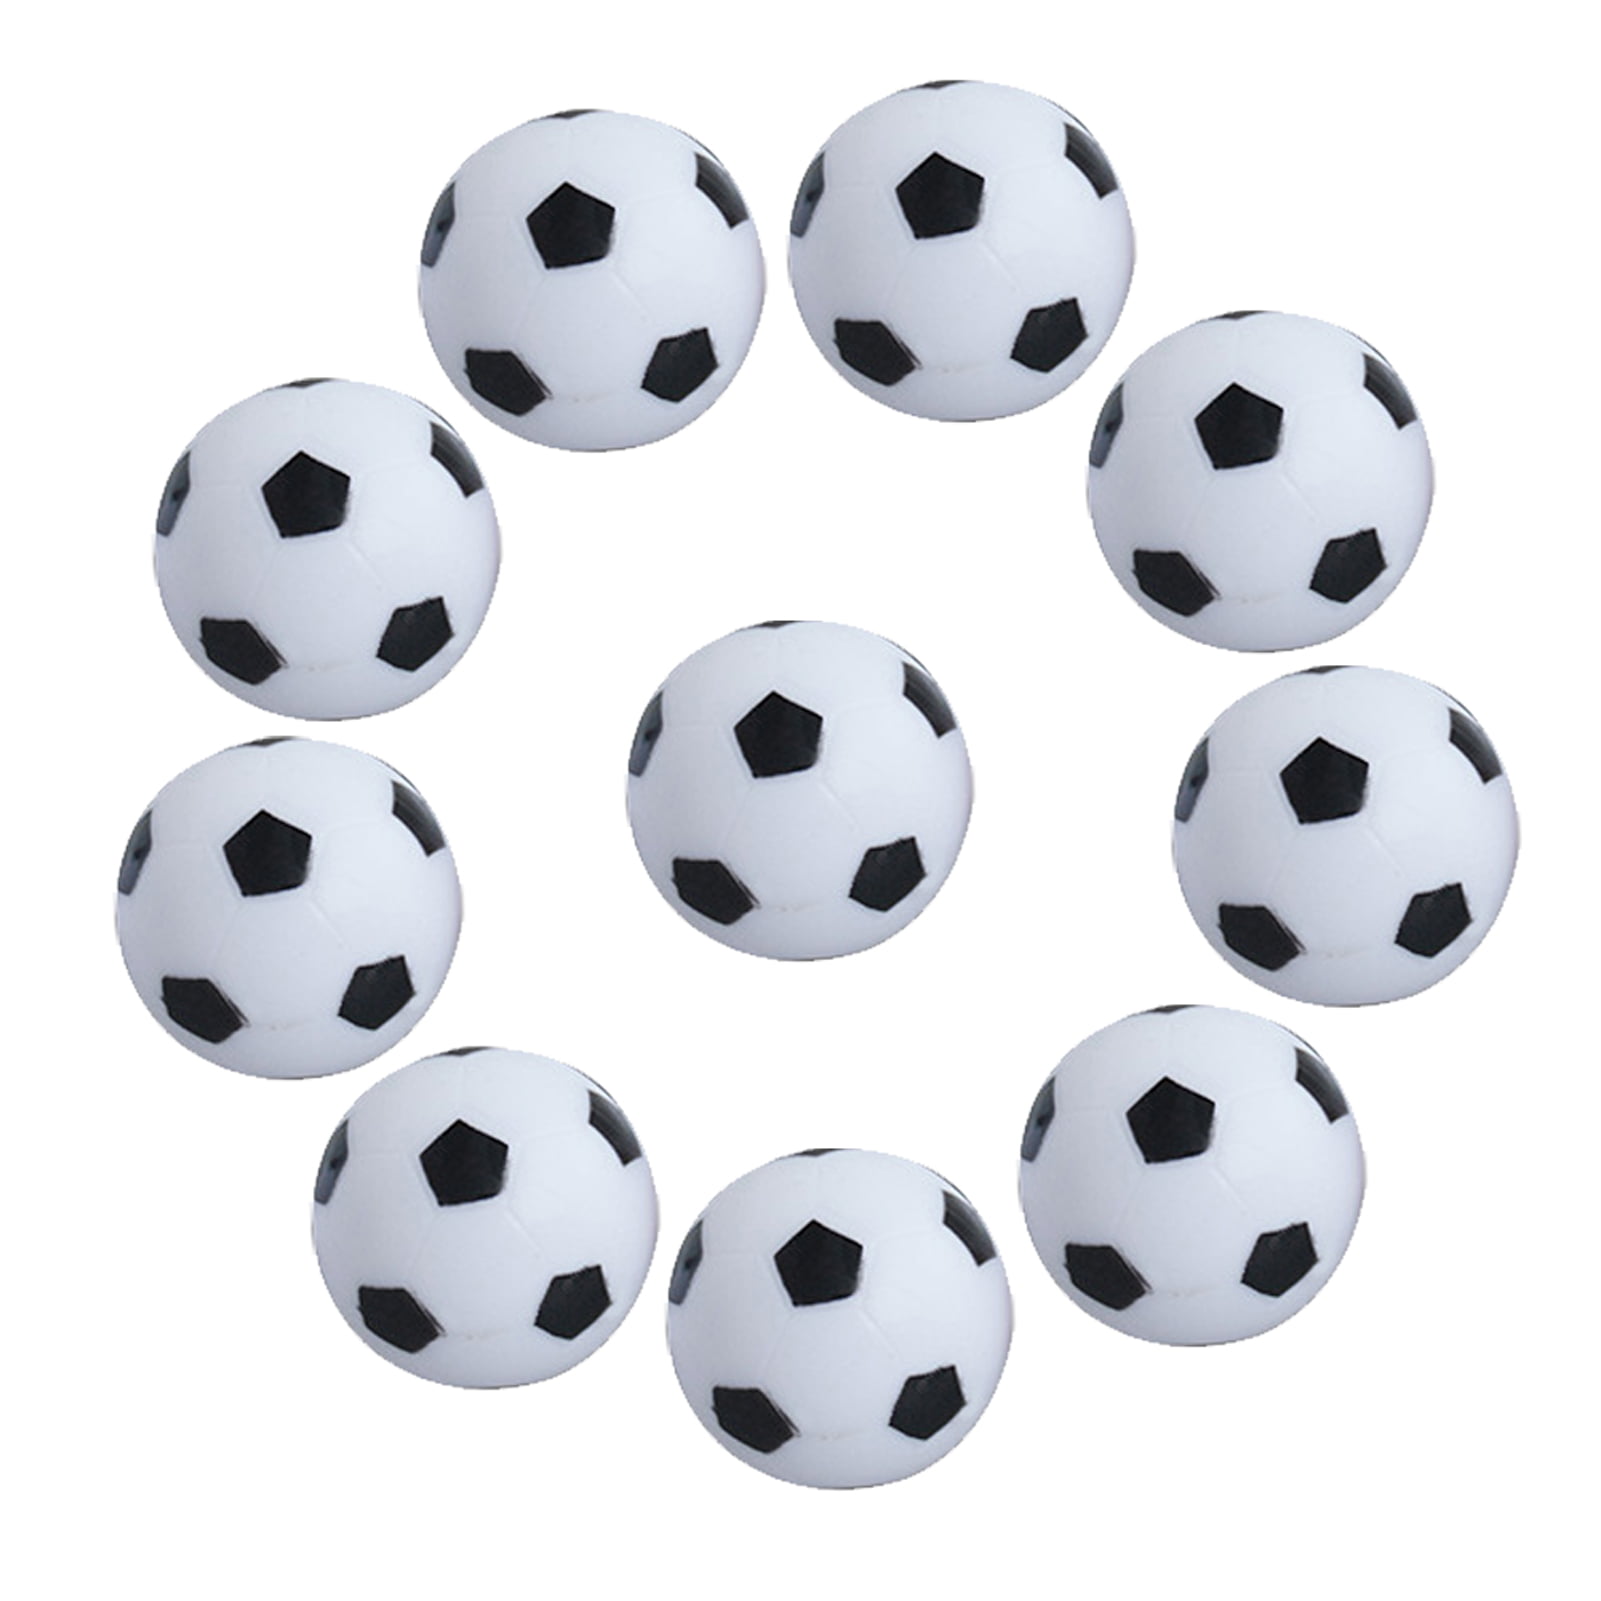 8pcs Black and White Football Table Soccer Footballs Replacement Balls Table 